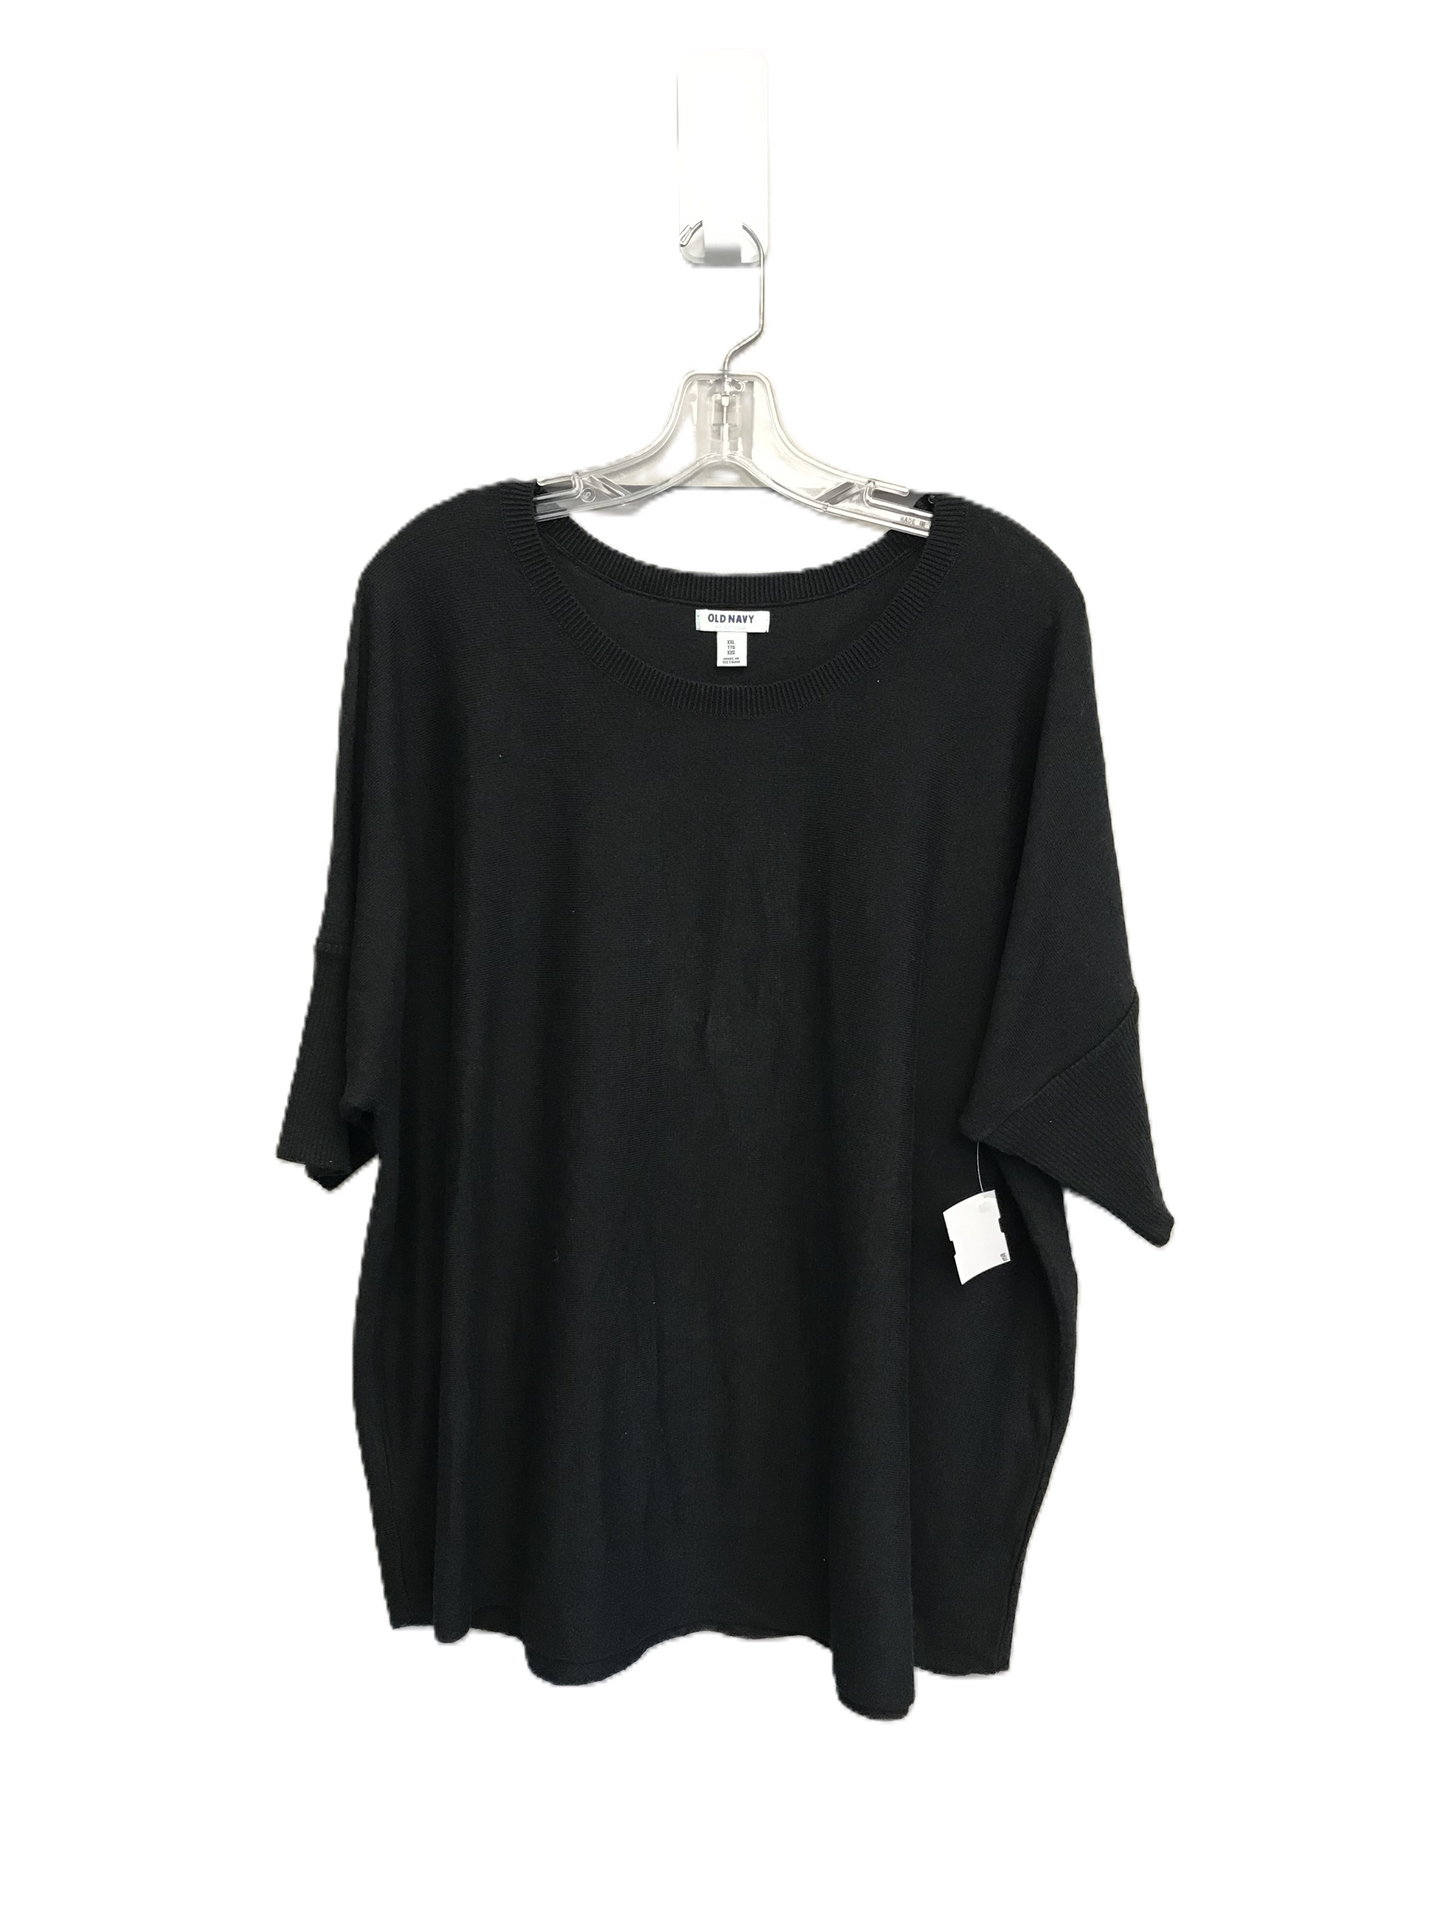 Black Top Short Sleeve By Old Navy, Size: 1x